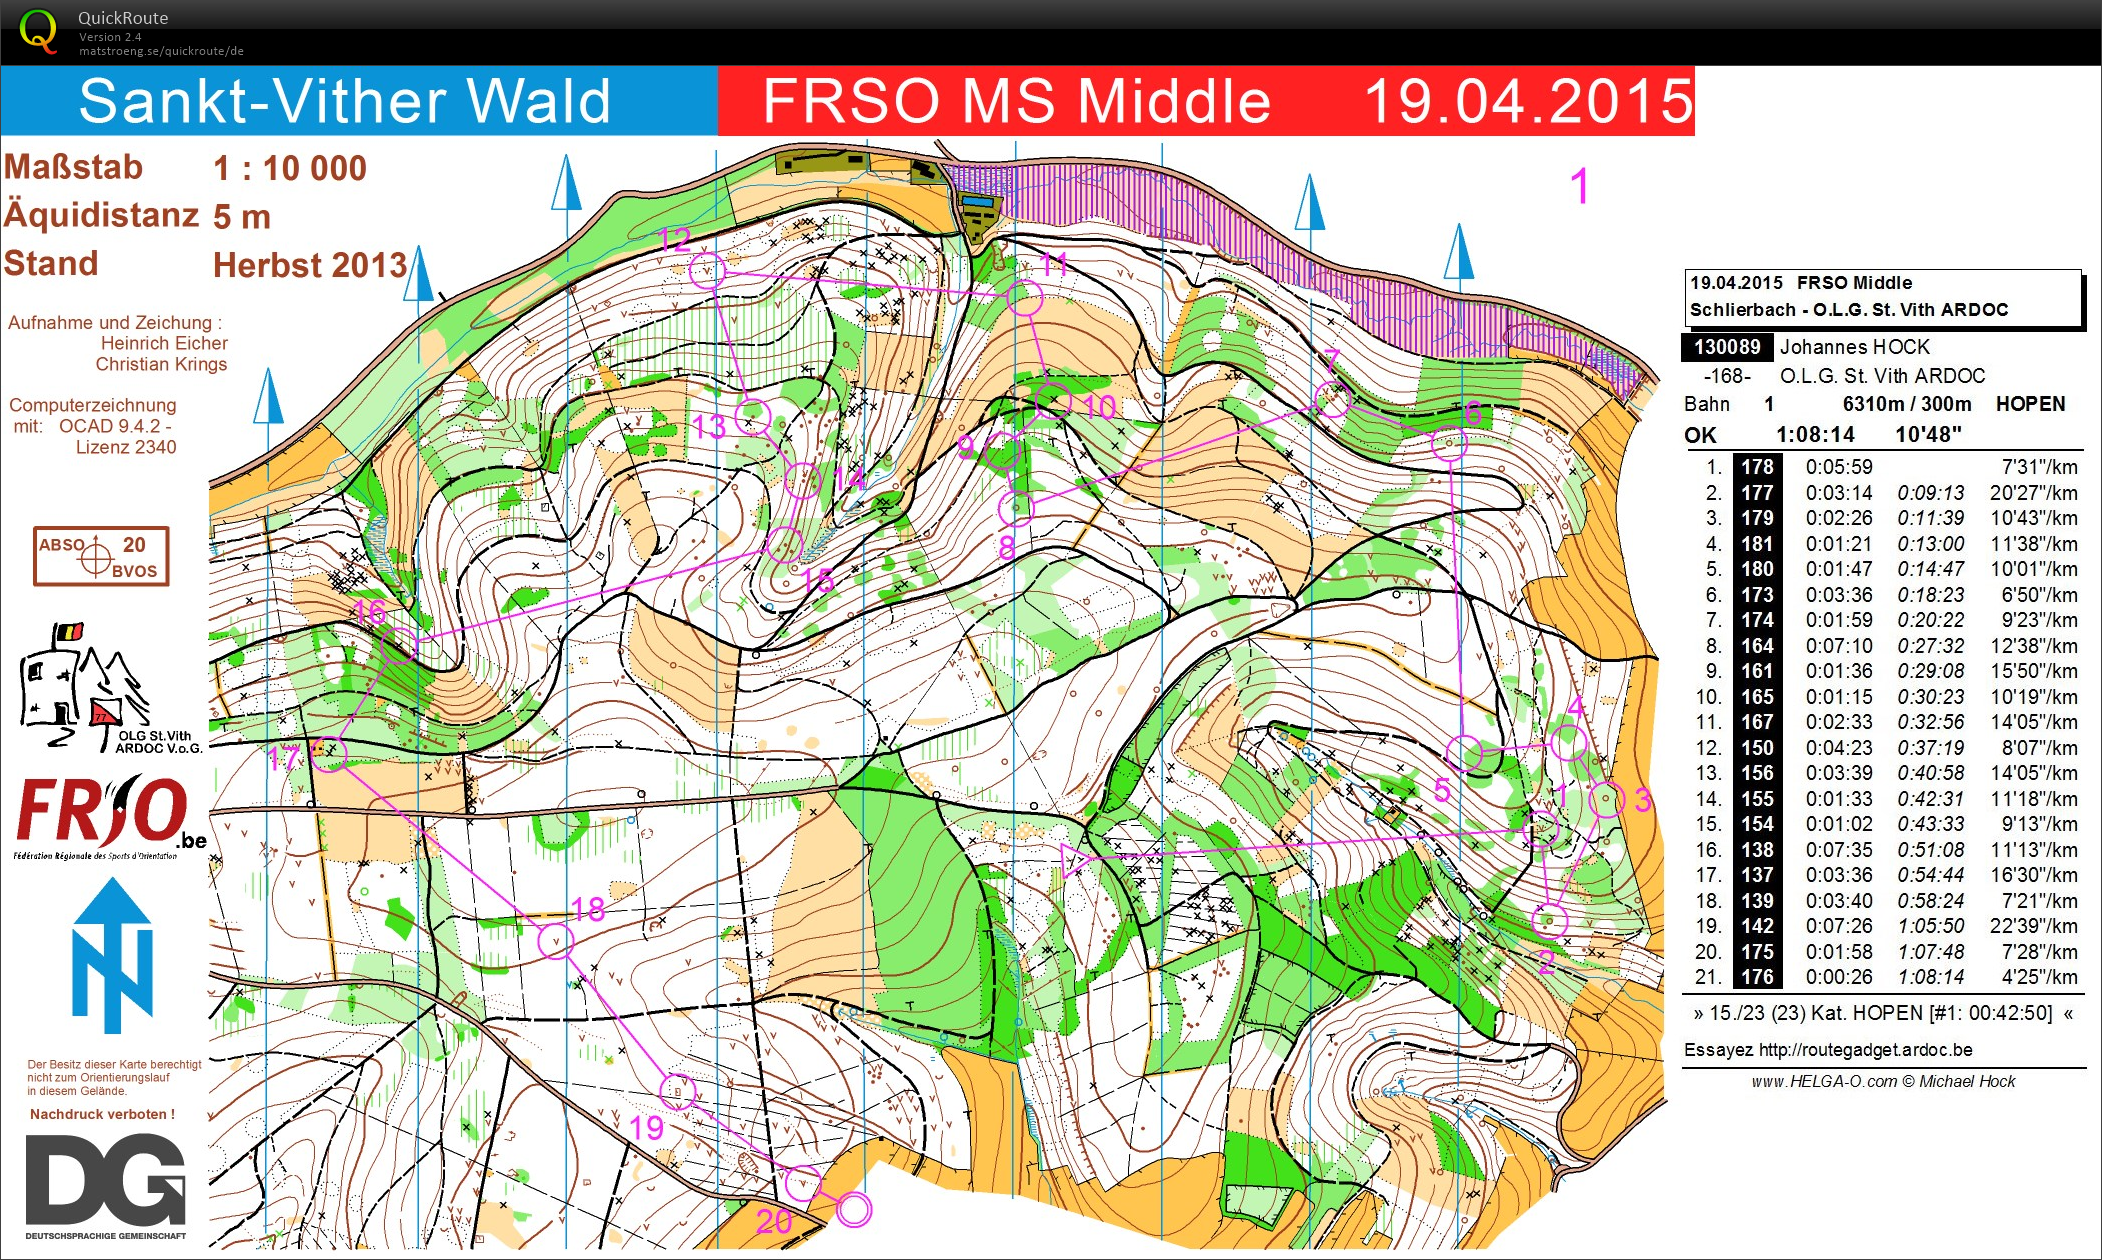 FRSO Middle (19-04-2015)